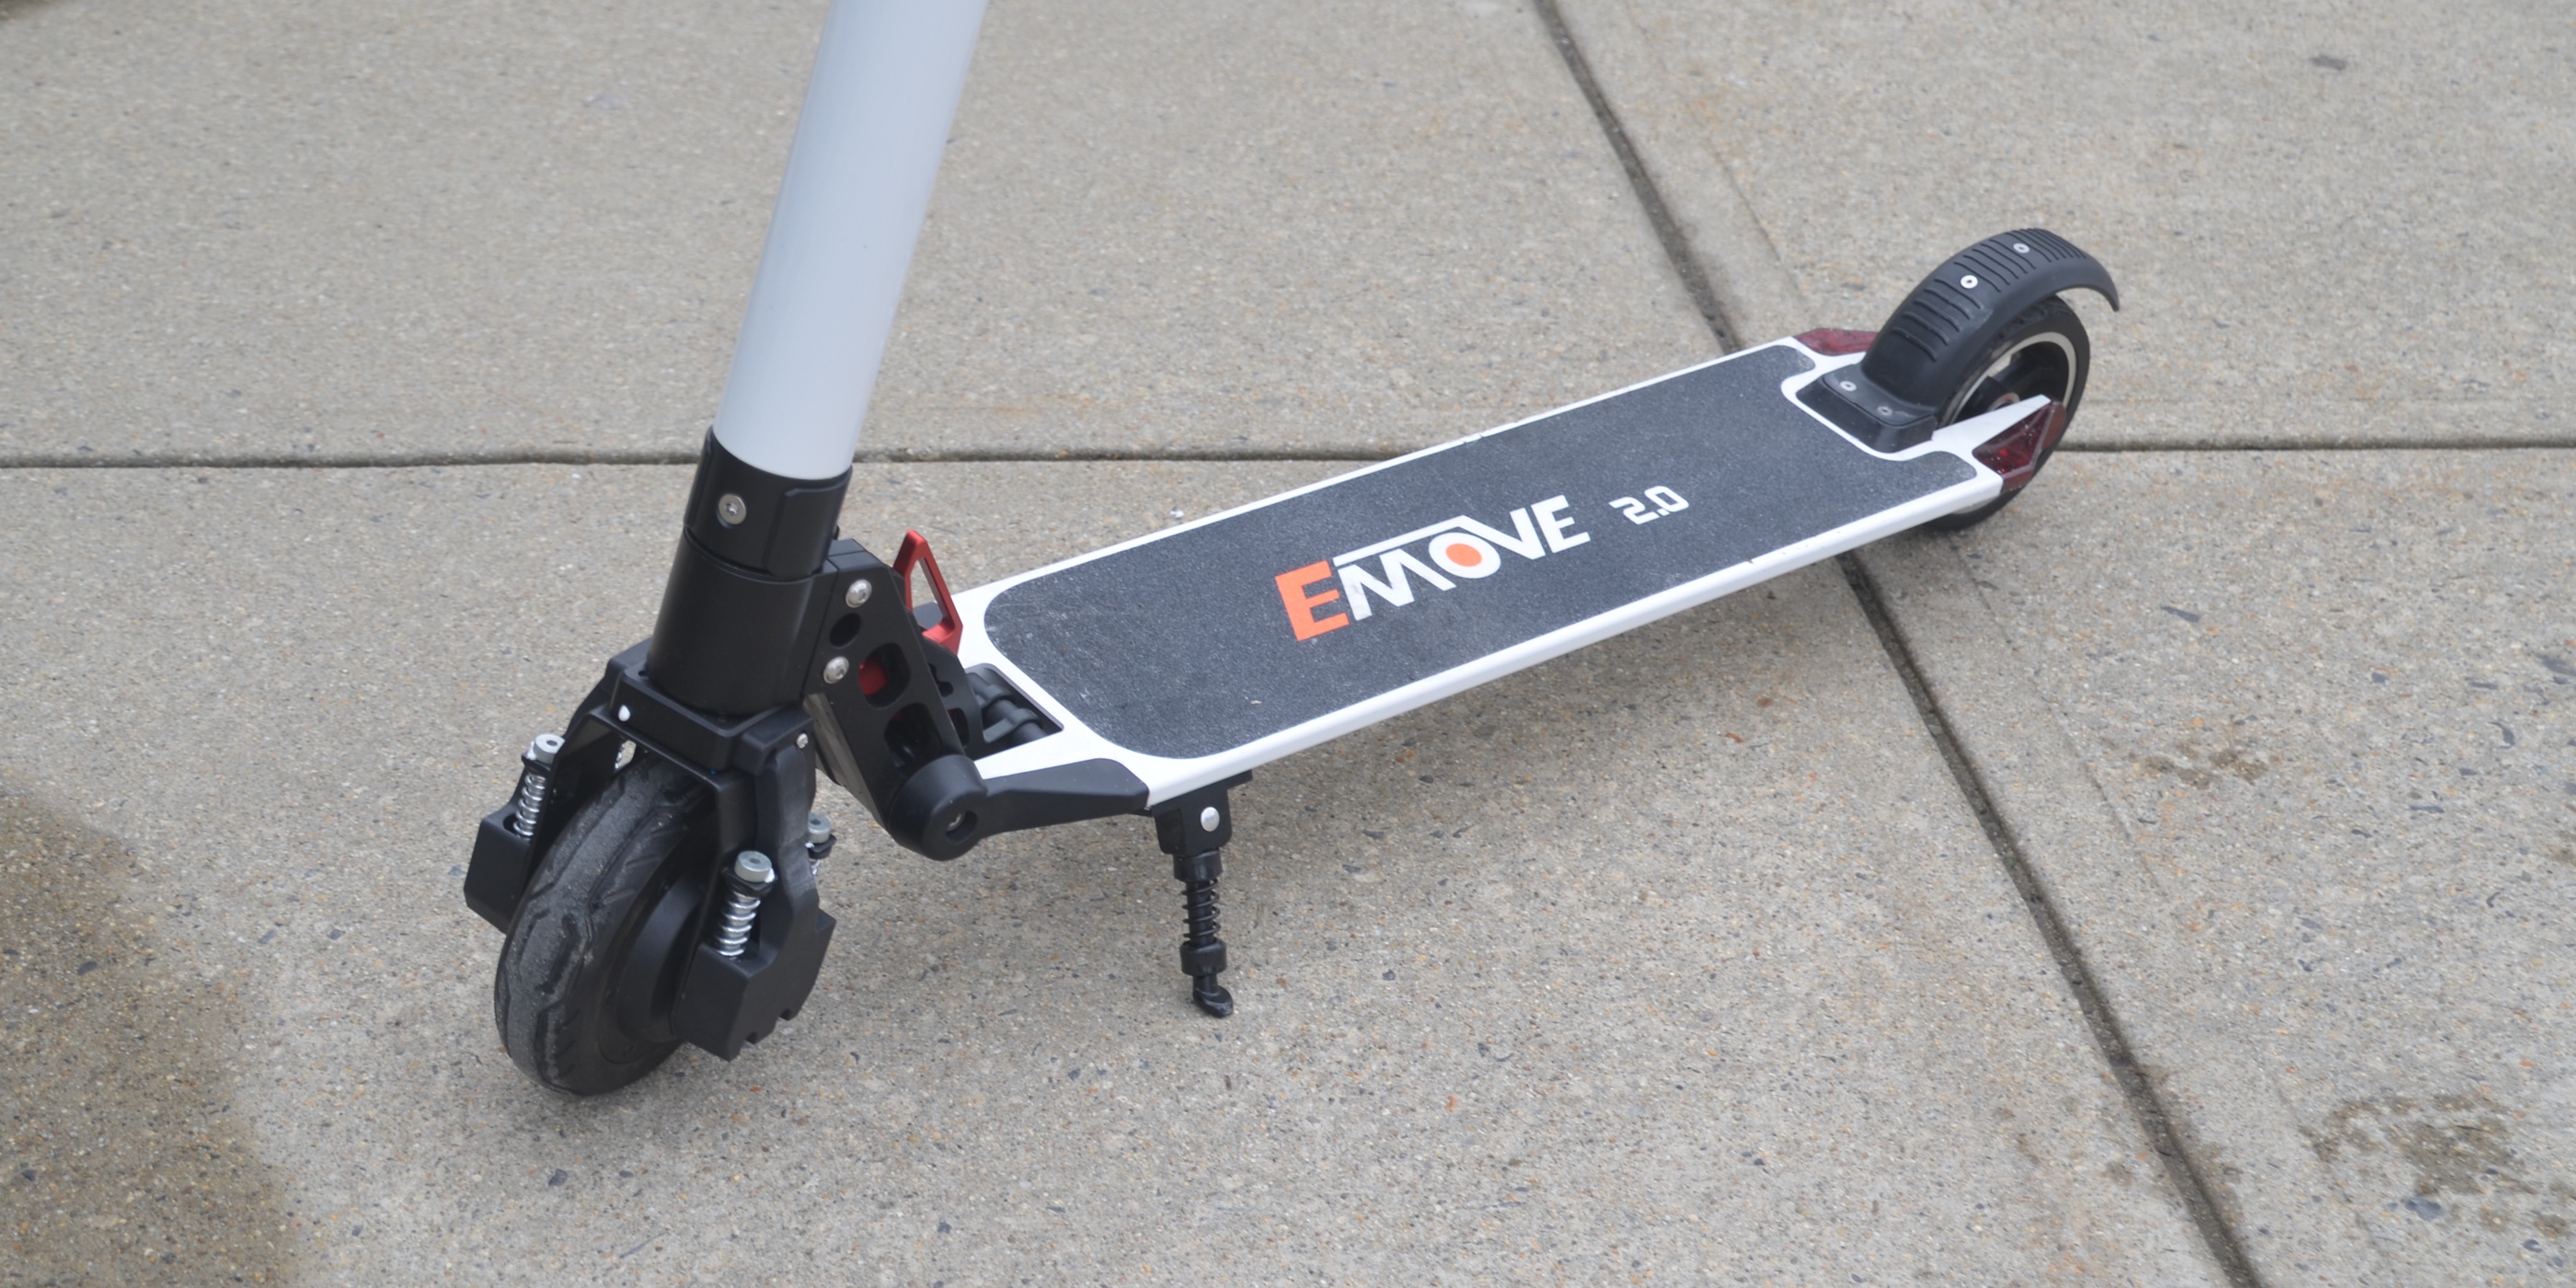 Review: EMOVE 2.0 electric scooter is the lightest I’ve ridden at just 7 kg